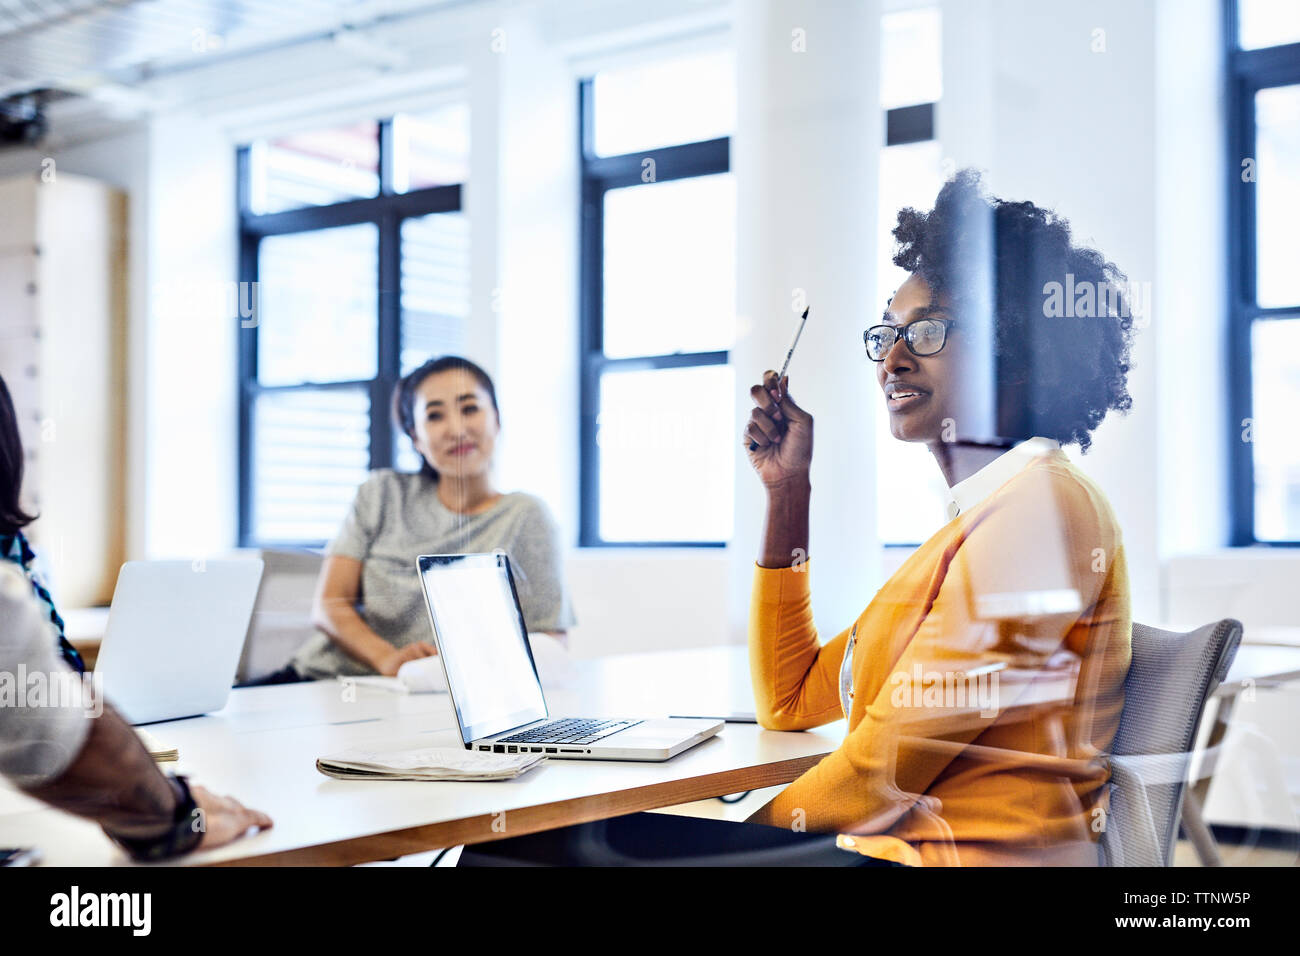 business people discussing during meeting seen through window Stock Photo